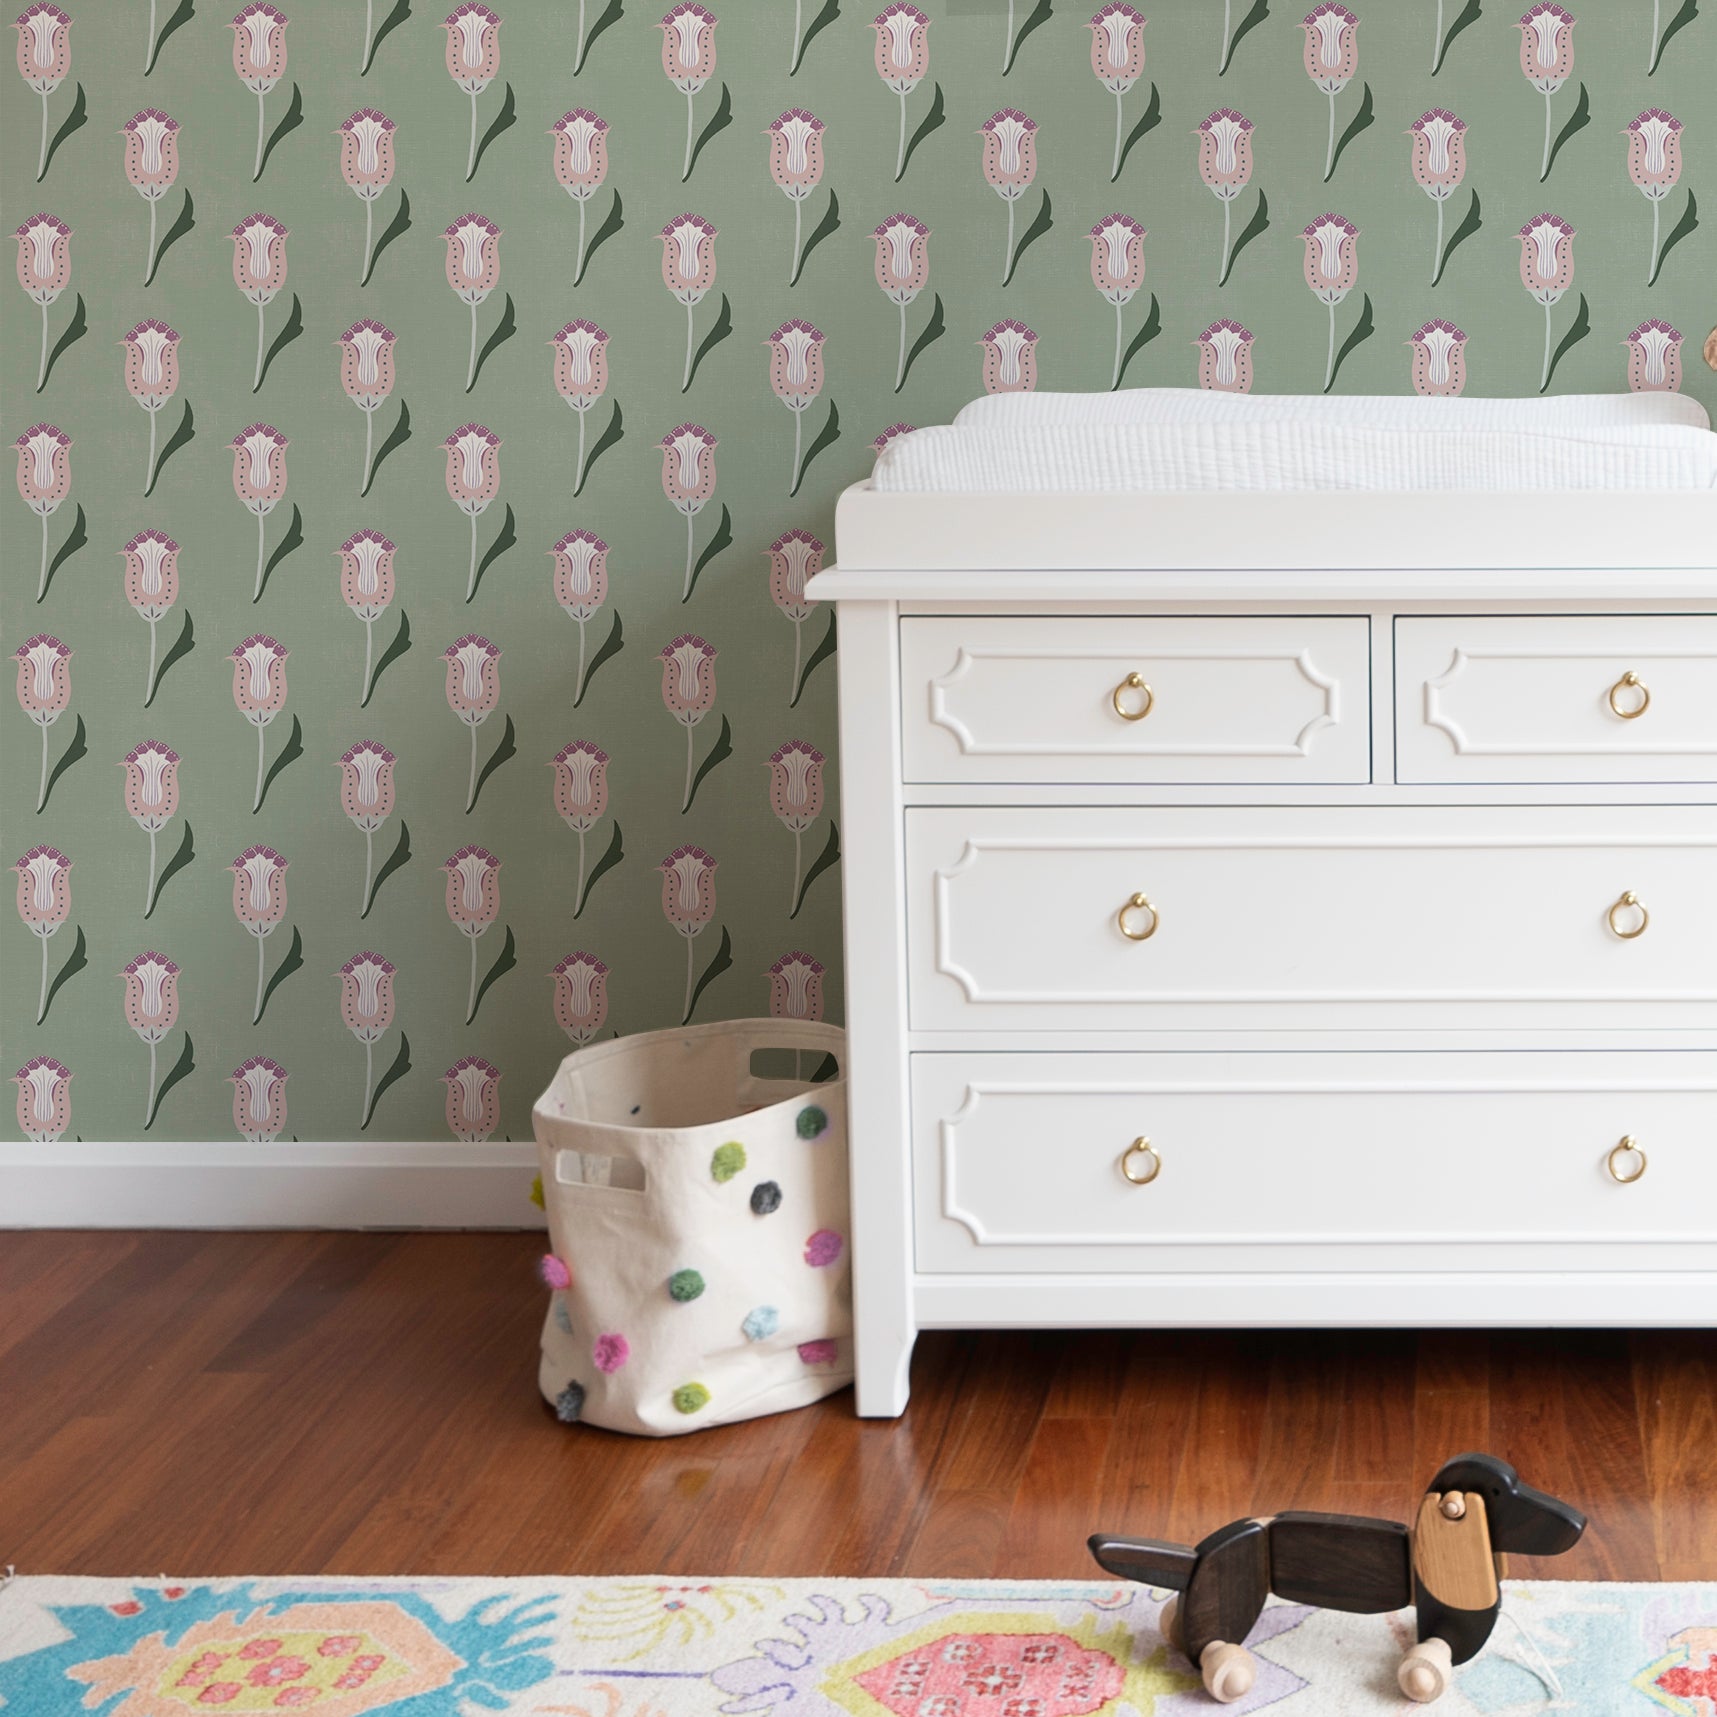 sage green wallpaper with pink and forest green abstract floral pattern on a wall with a white baby changing table in front with drawers and a colorful rug